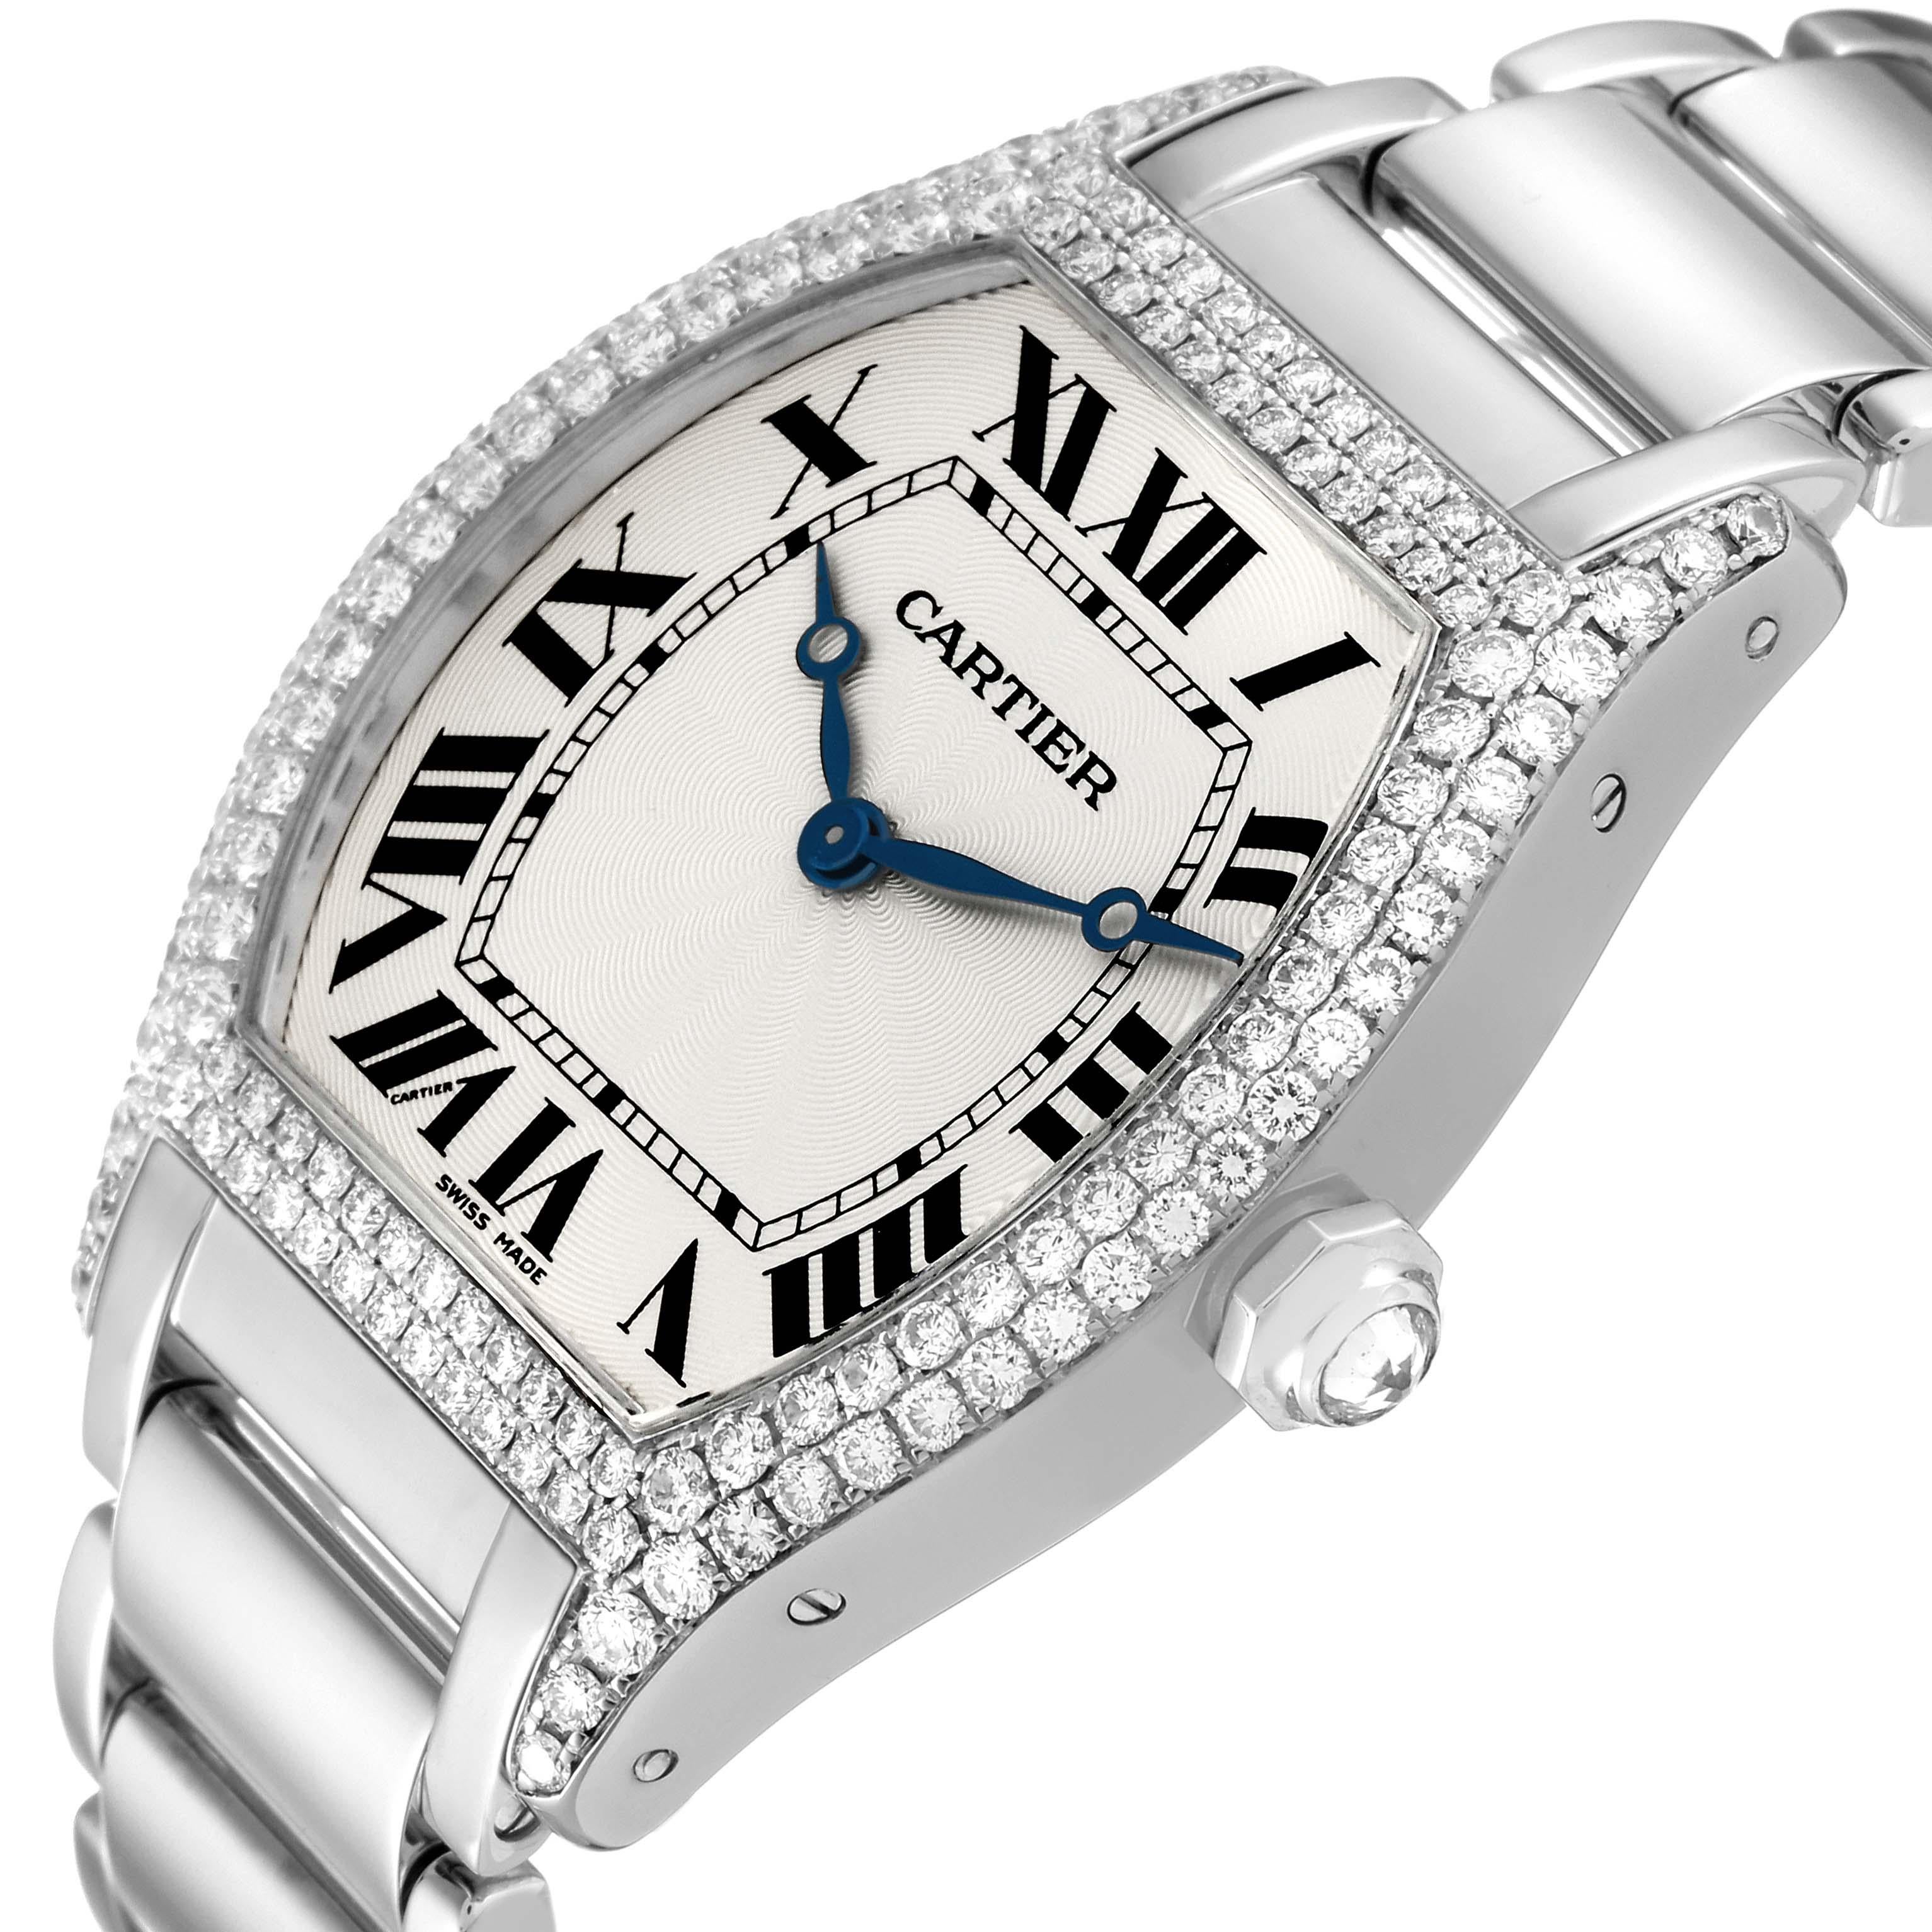 Cartier Tortue White Gold Diamond Bezel Mens Watch WA504351 In Excellent Condition For Sale In Atlanta, GA